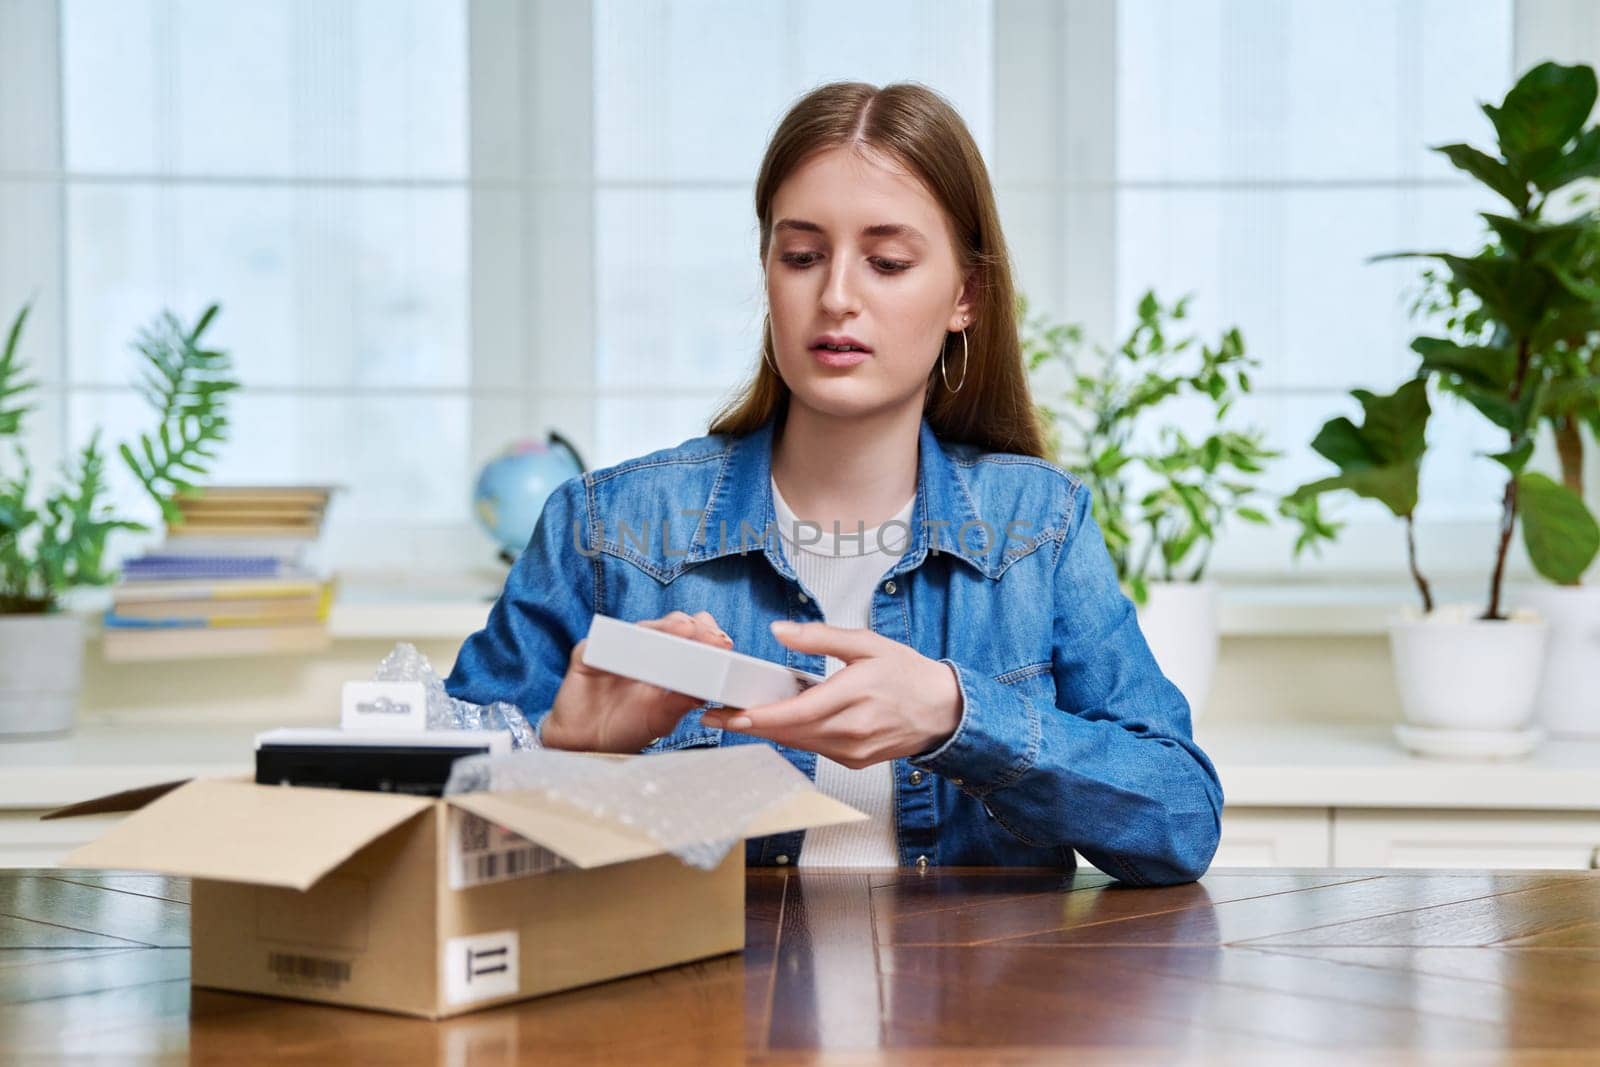 Satisfied young female shopper at home unpacks cardboard box with online purchases by VH-studio